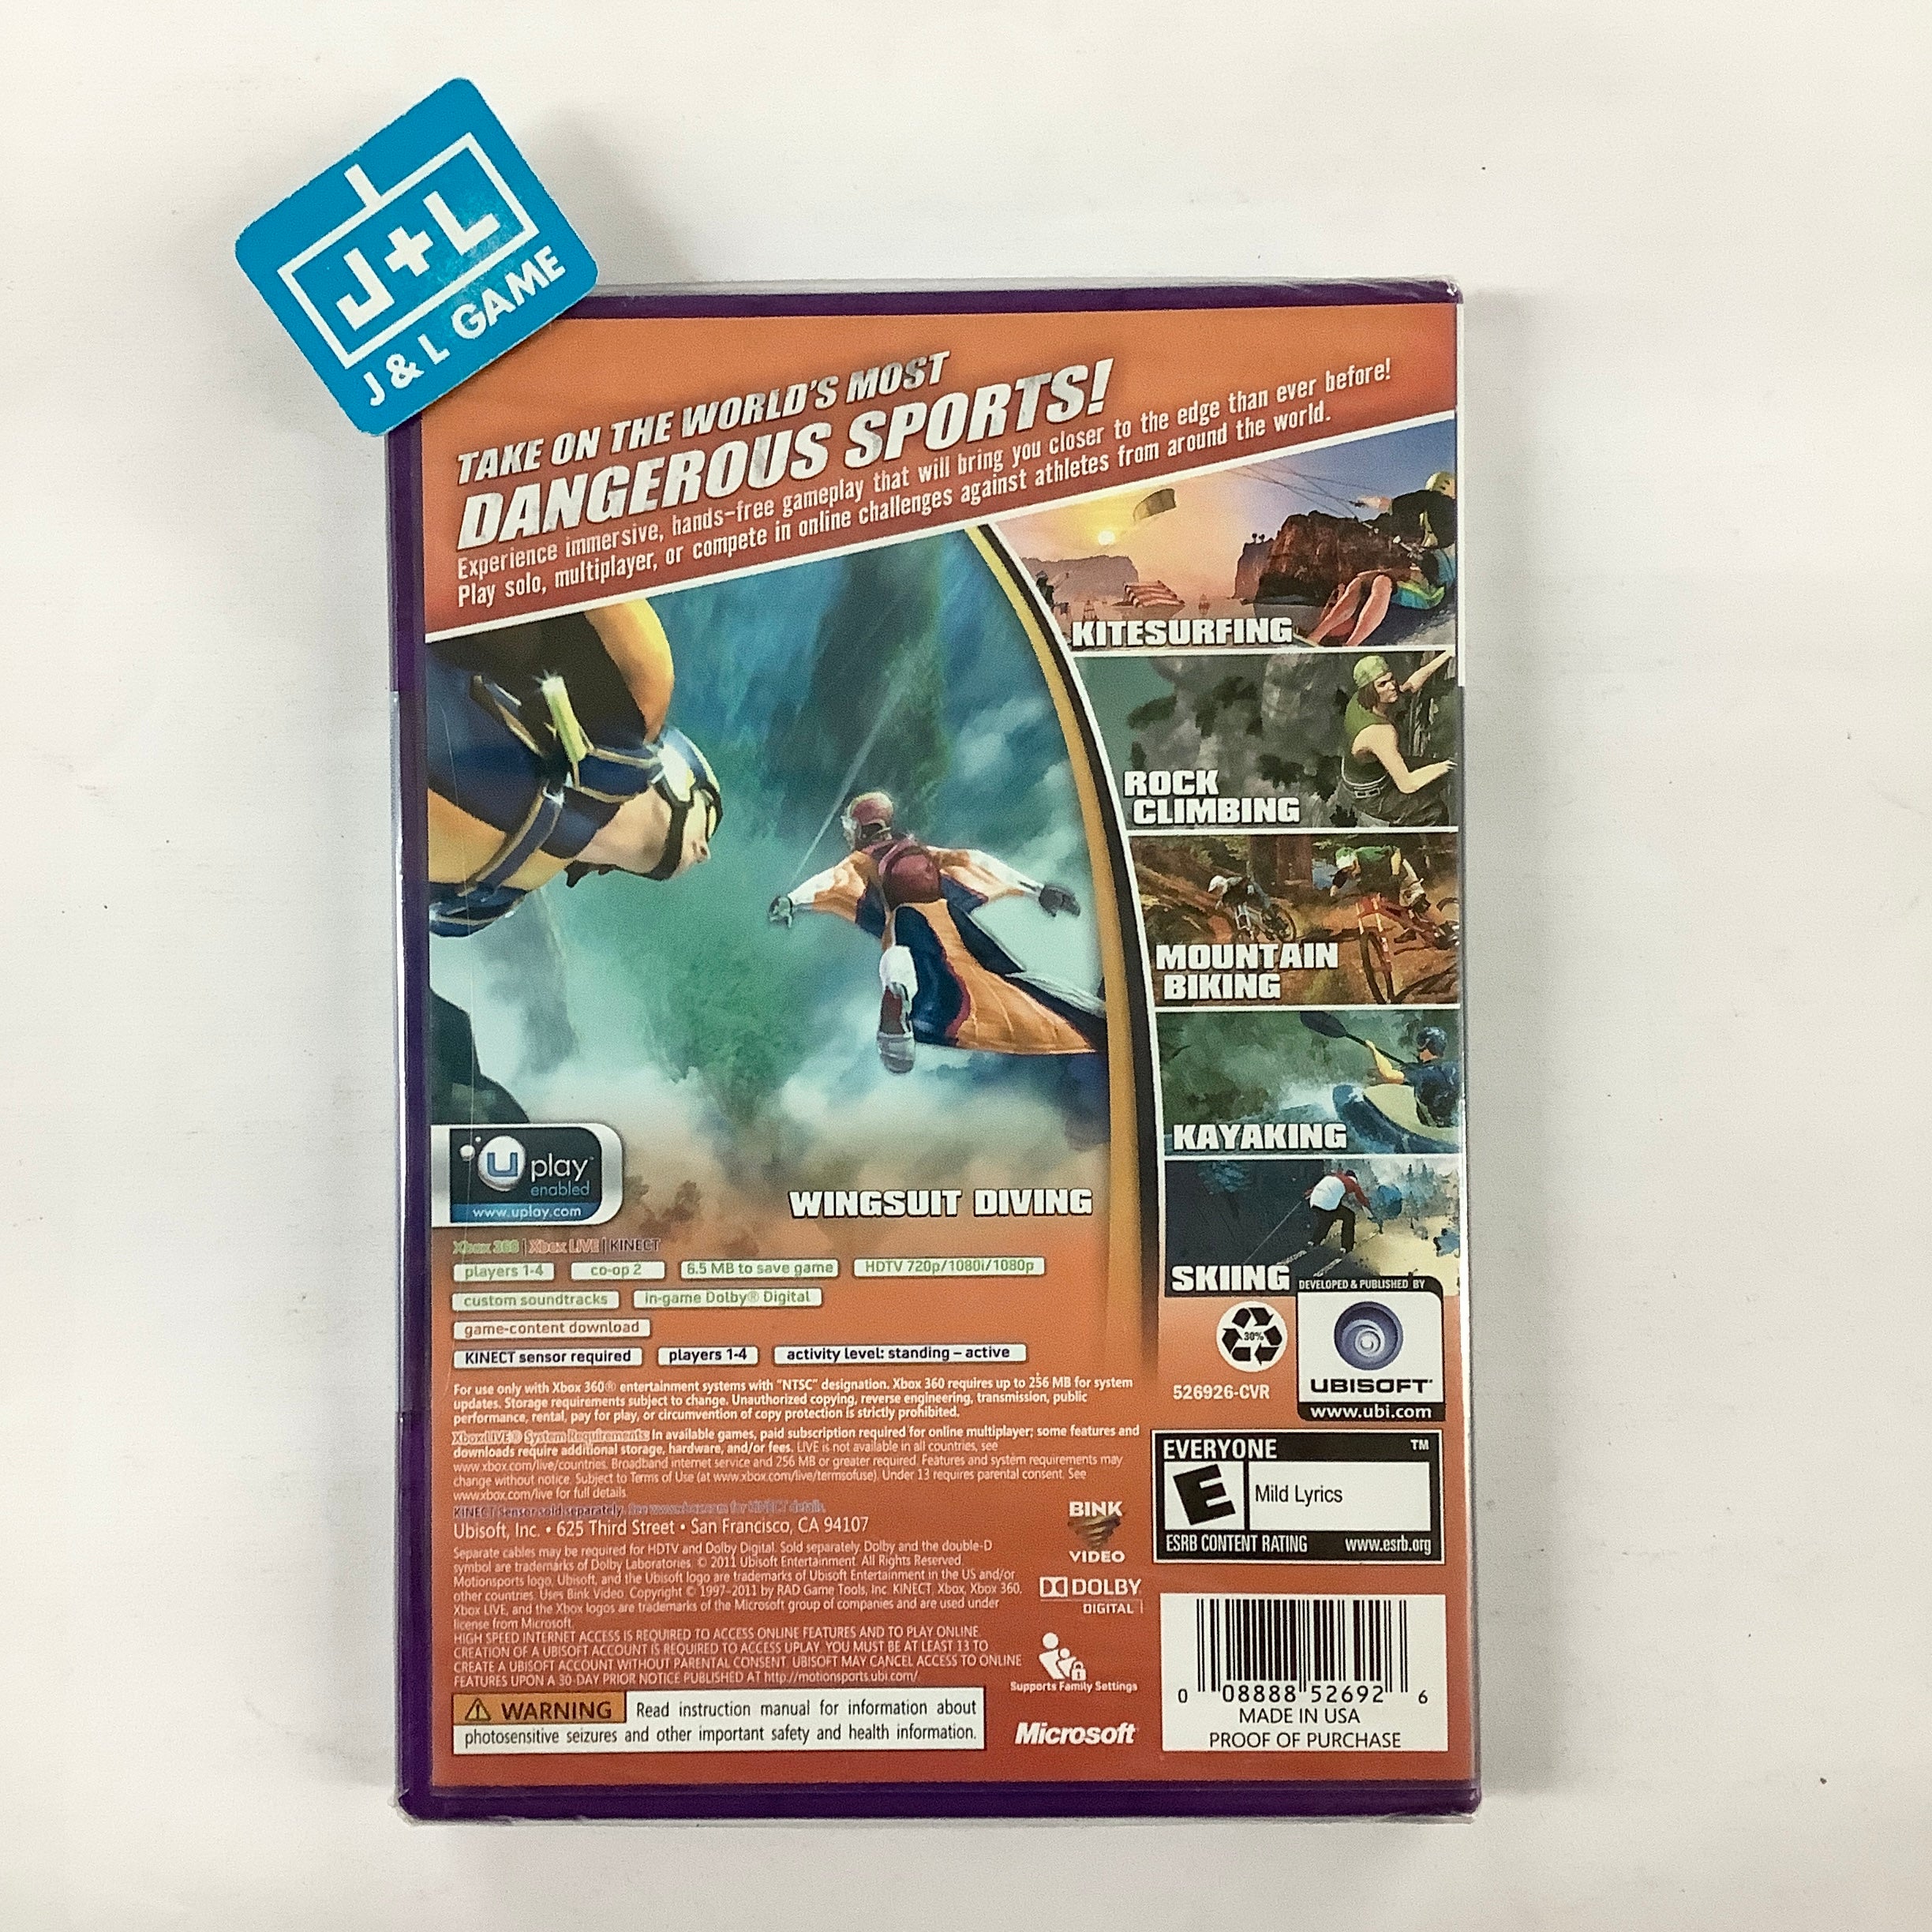 MotionSports Adrenaline (Kinect Required) - Xbox 360 Video Games Ubisoft   